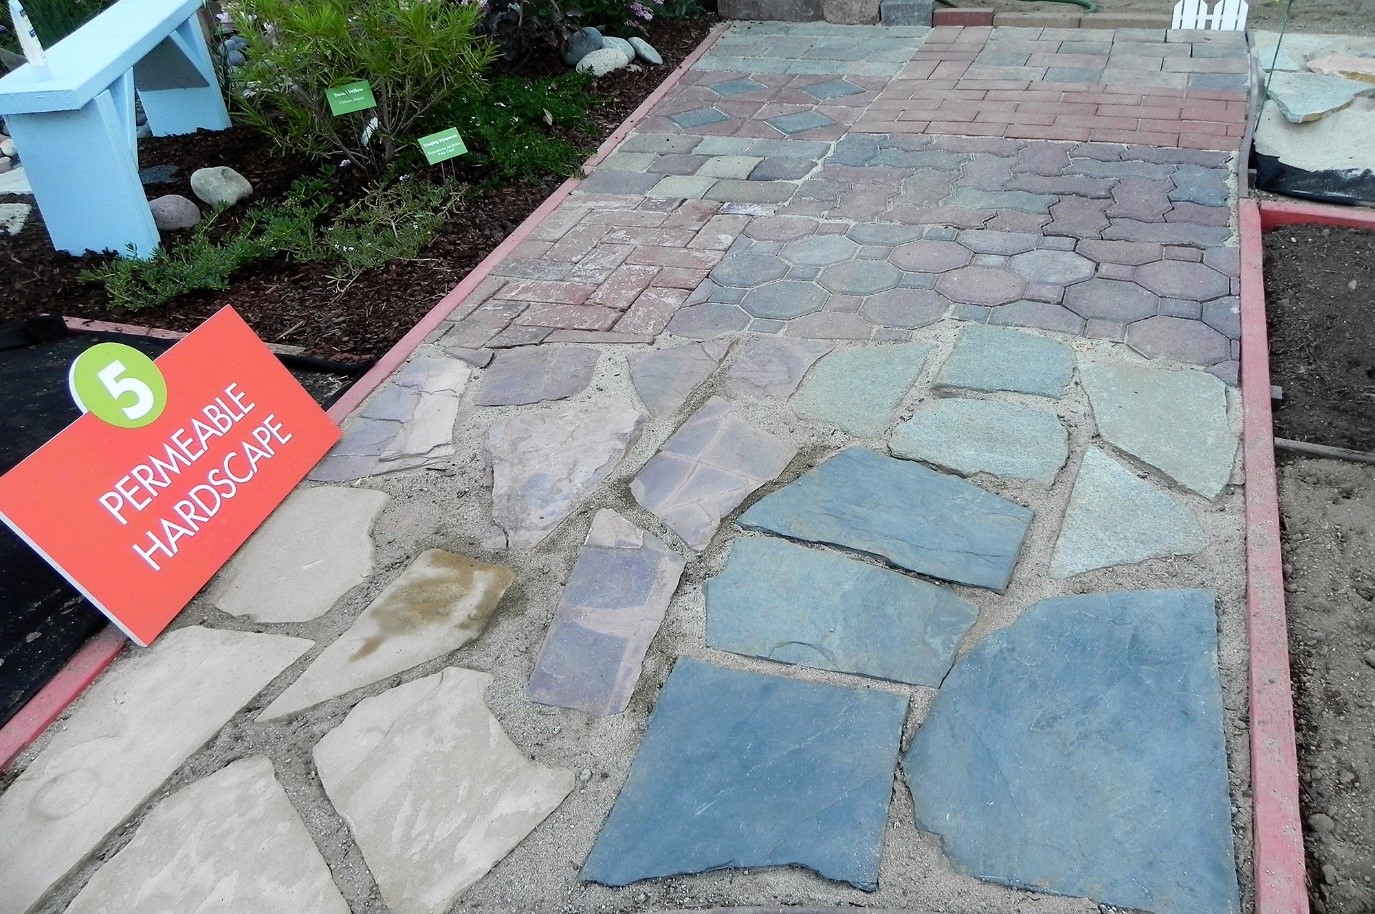  Create spaces between pavers for water to seep through.